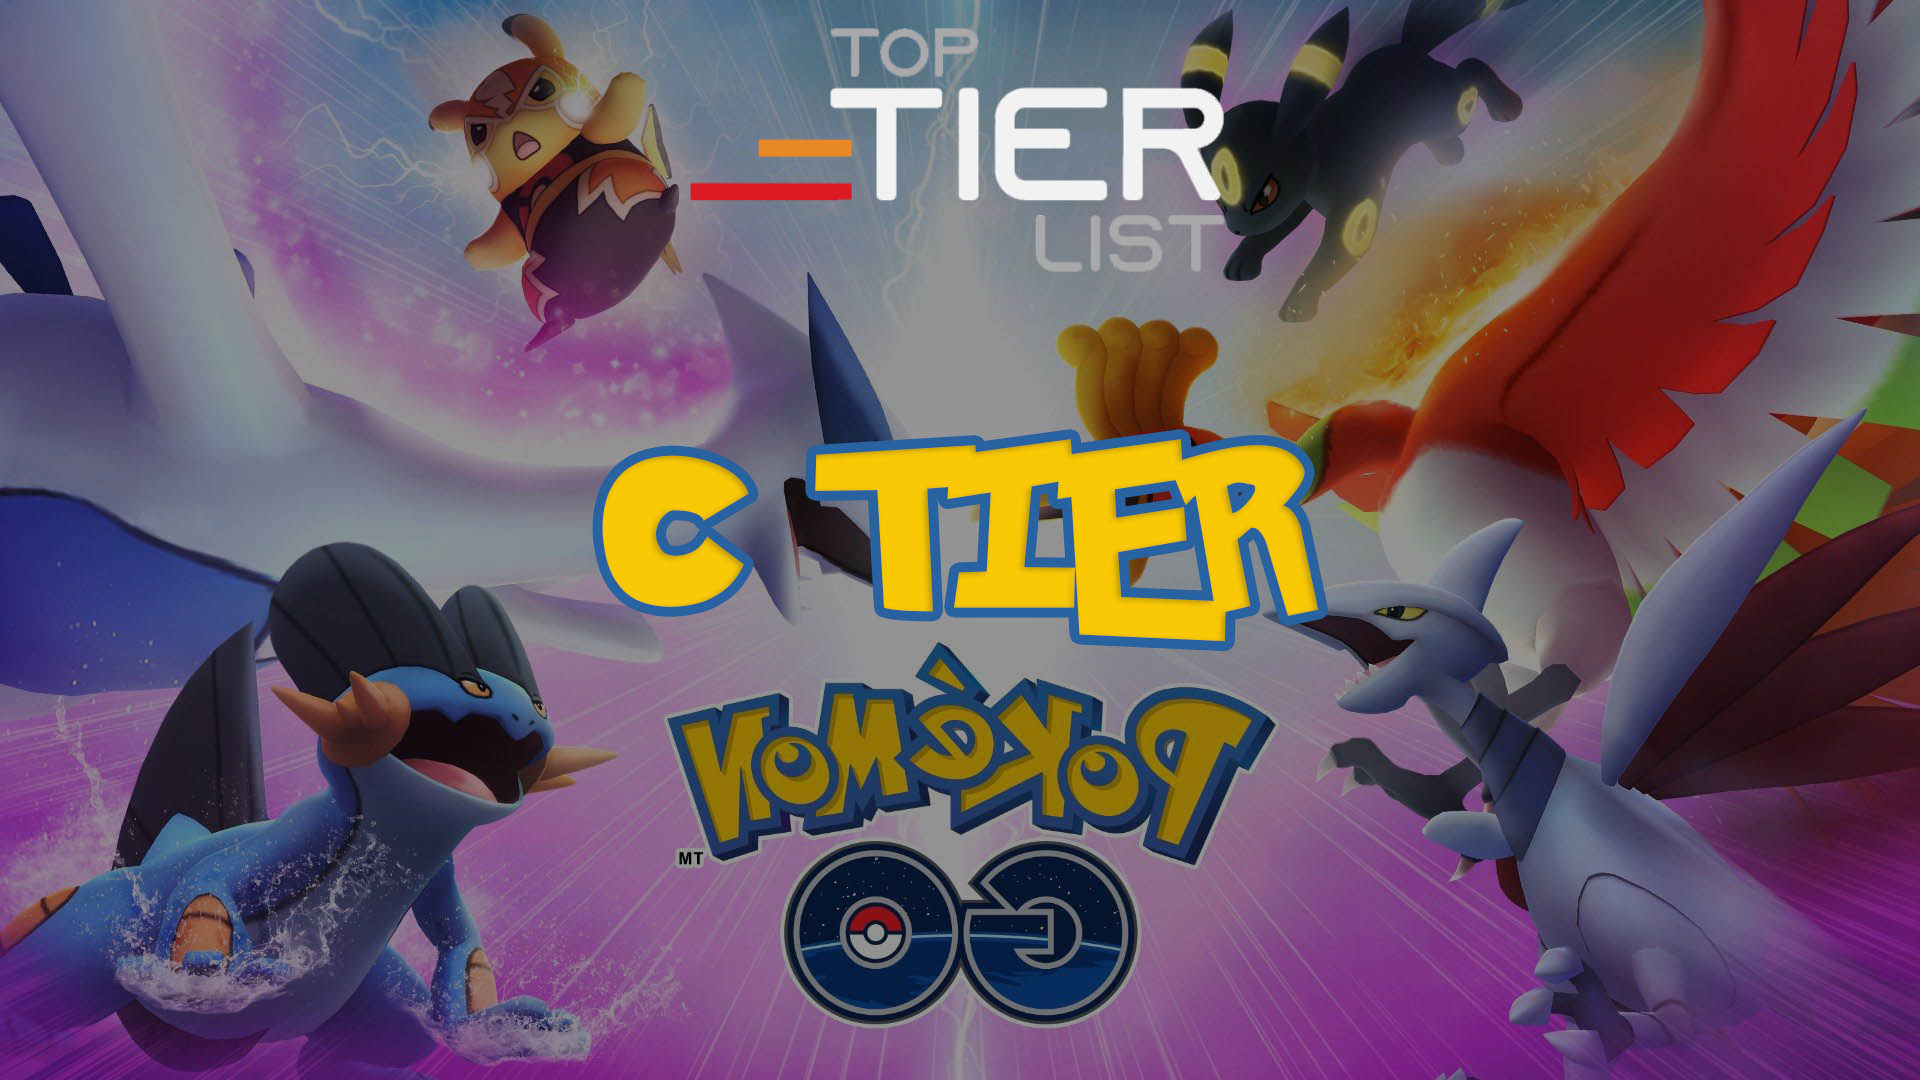 Notable Pokemons in the Ultra League Tier List